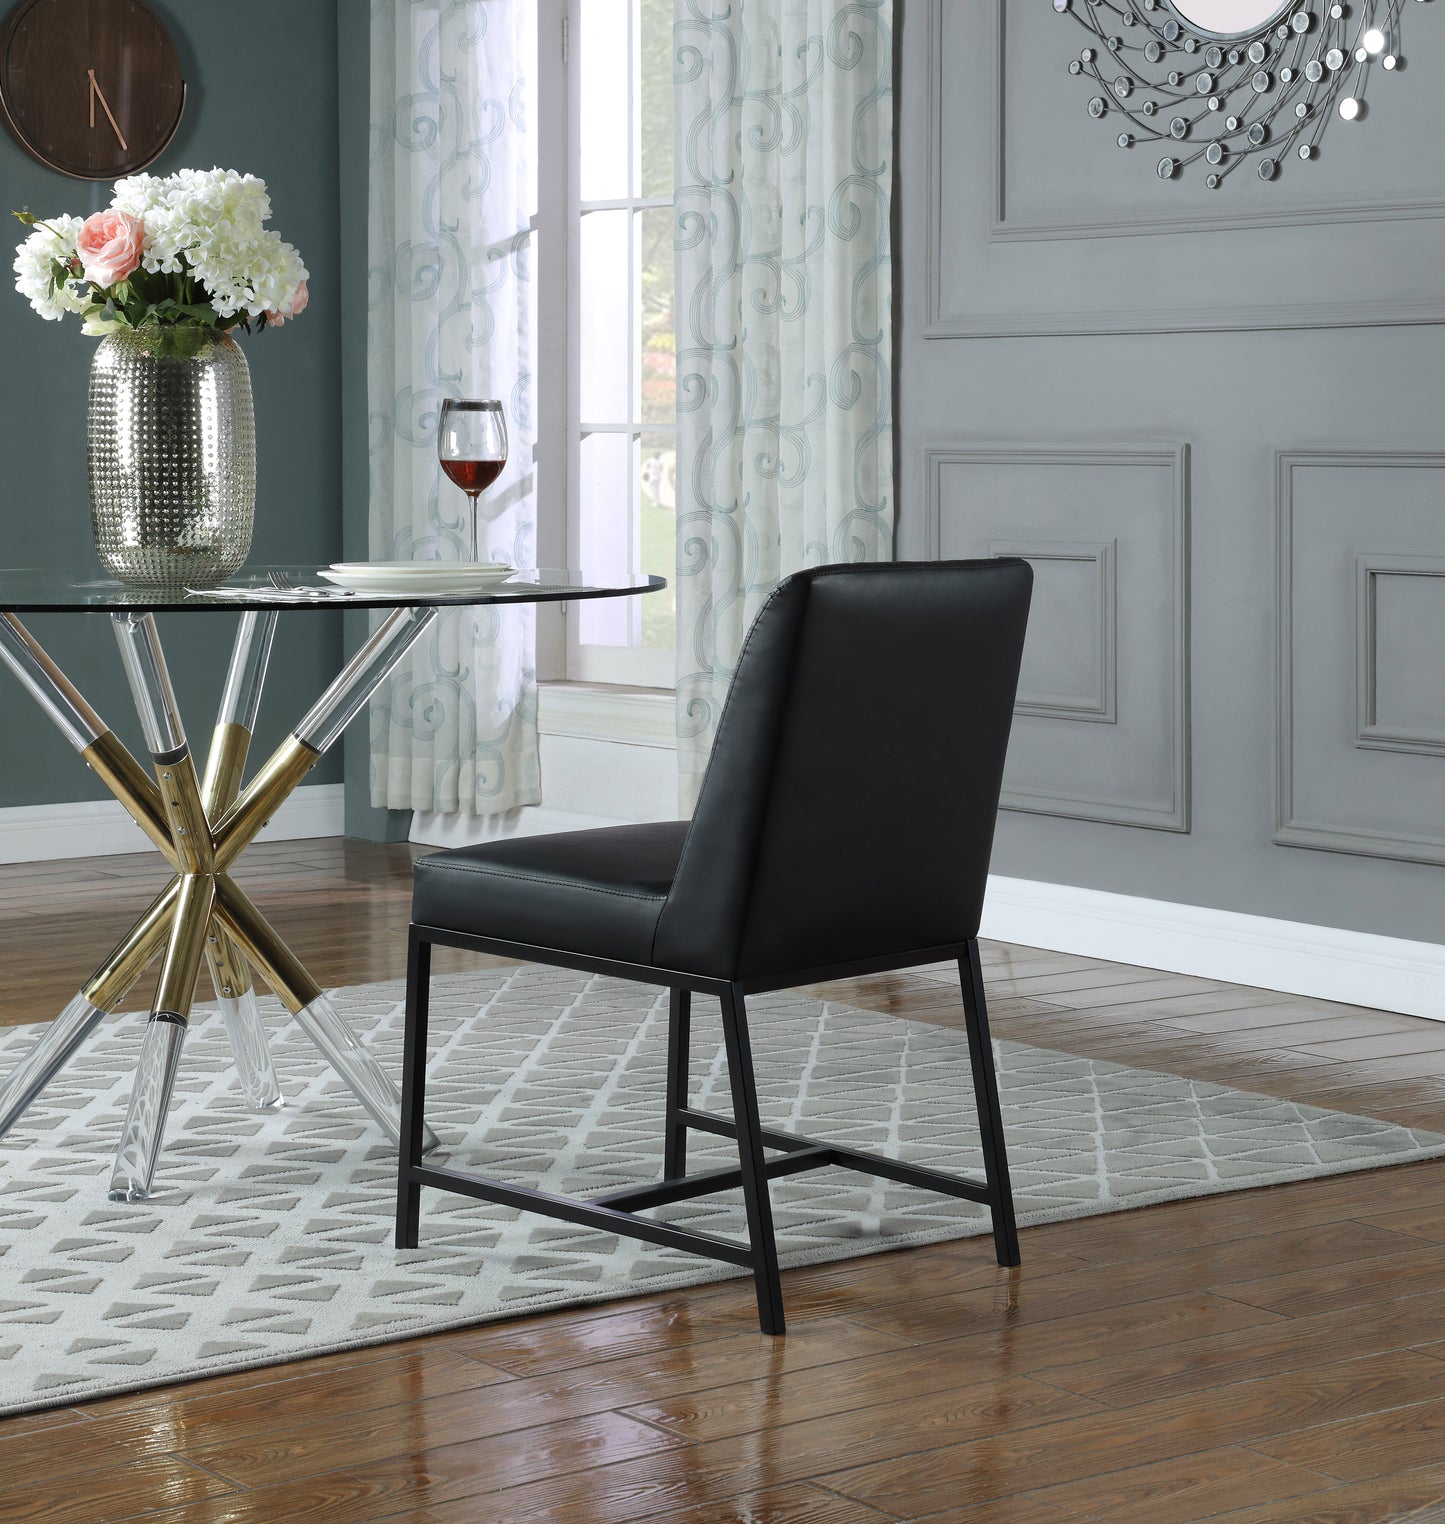 naples black faux leather dining chair c